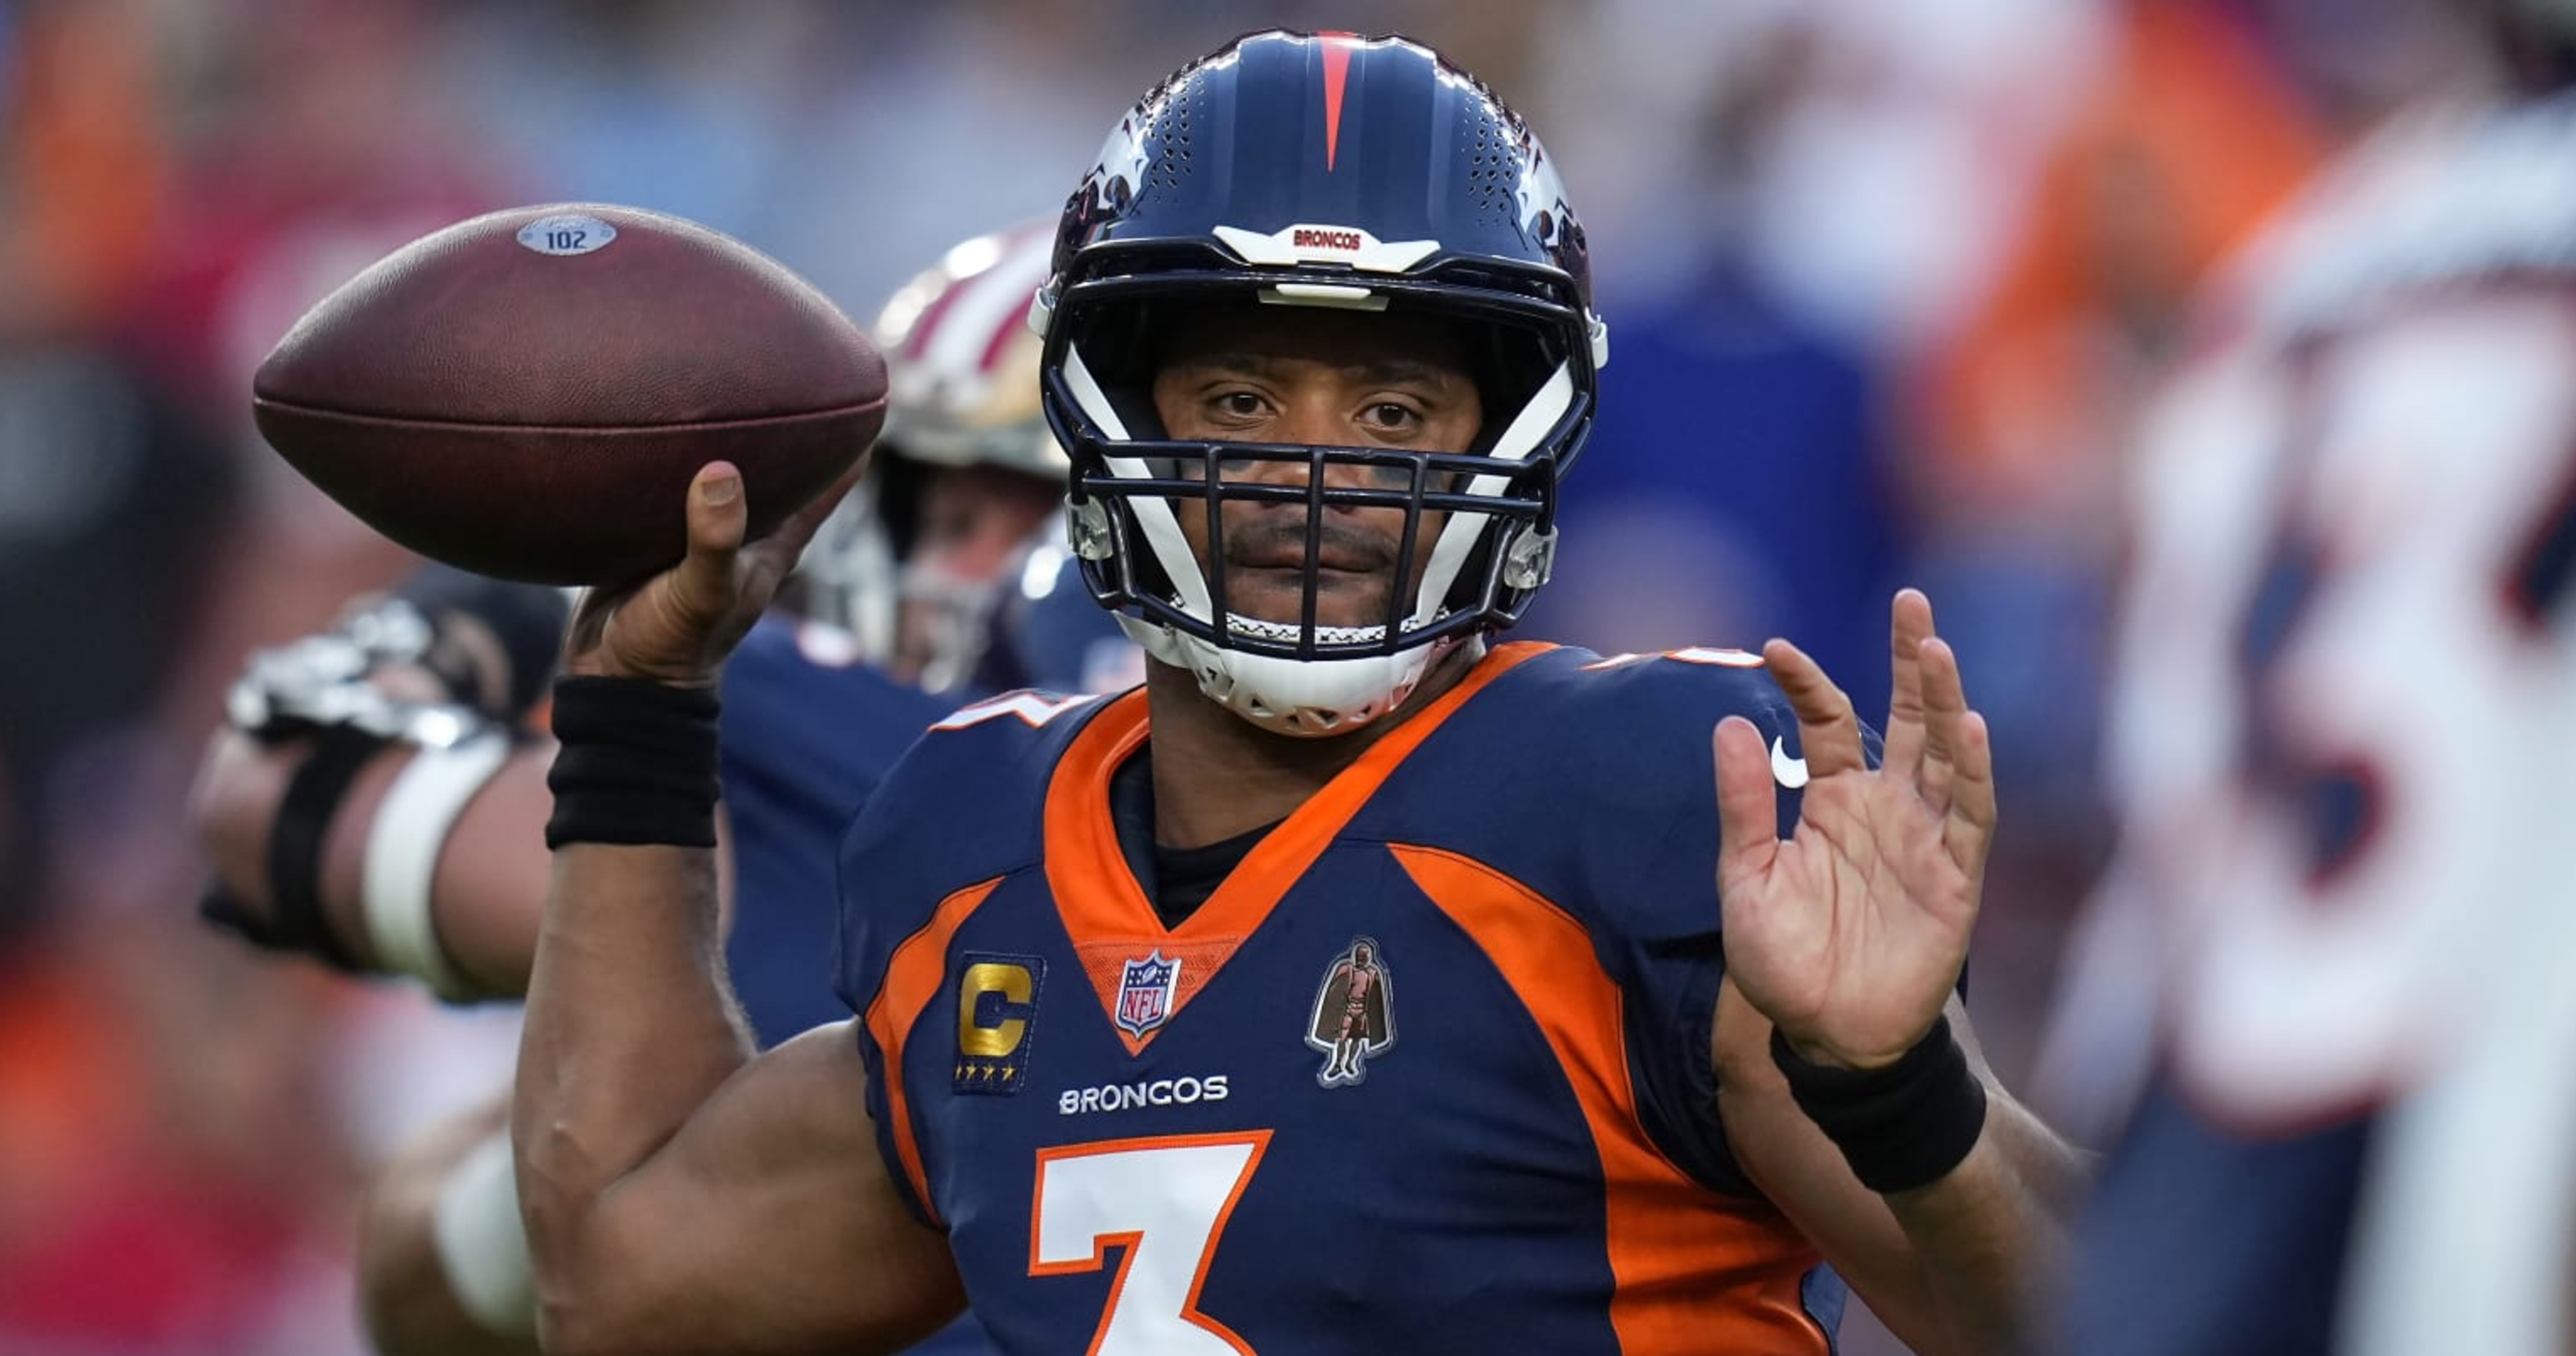 Russell Wilson and the Broncos are a disappointment